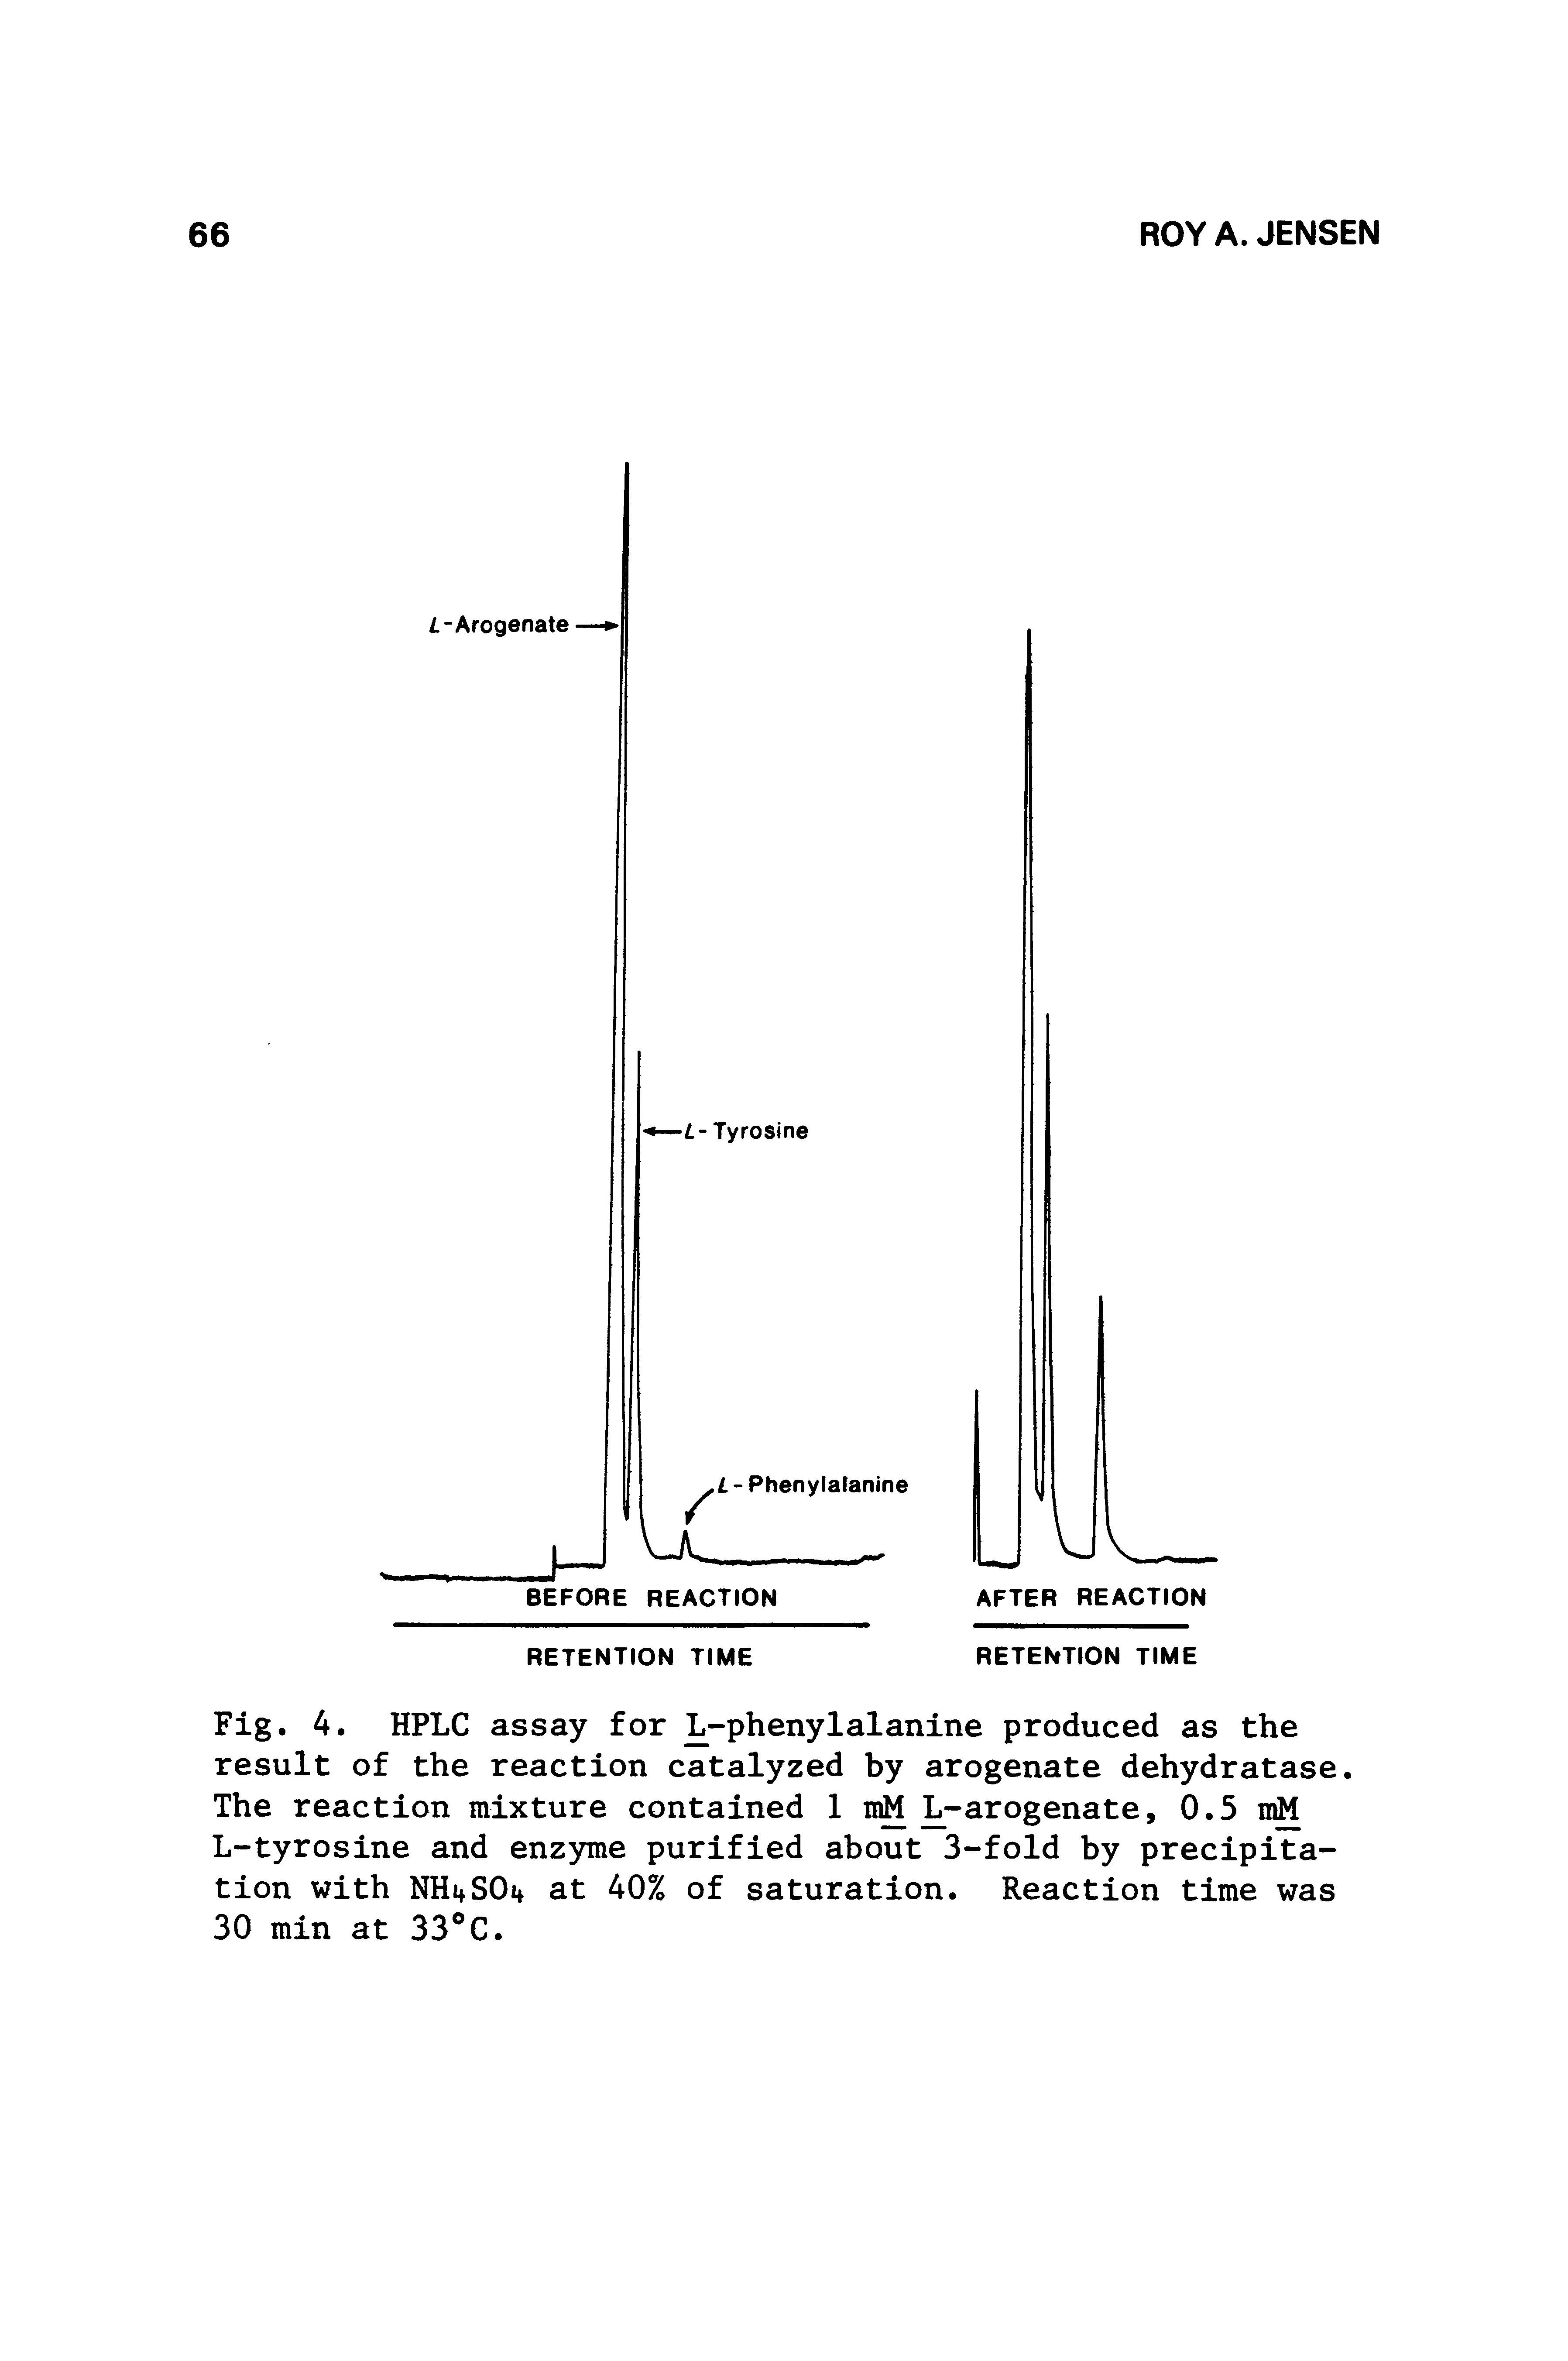 Fig. 4. HPLC assay for L-phenylalanine produced as the result of the reaction catalyzed by arogenate dehydratase. The reaction mixture contained 1 ir L-arogenate, 0.5 nM L-tyrosine and enzyme purified about 3-fold by precipitation with NHi+SOi at 40% of saturation. Reaction time was 30 min at 33 C.